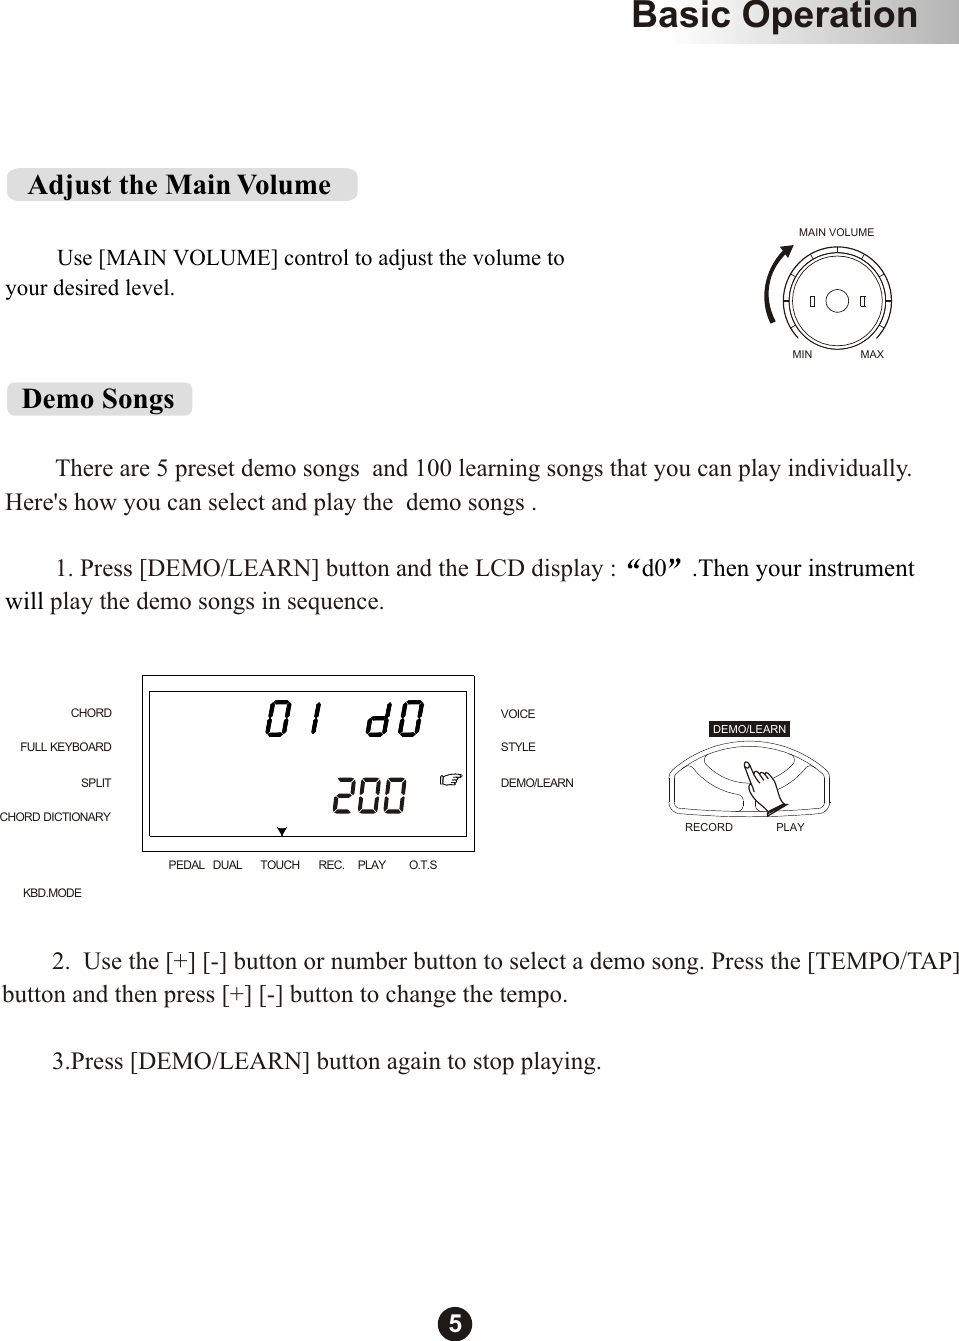           There are 5 preset demo songs  and 100 learning songs that you can play individually. Here&apos;s how you can select and play the  demo songs .        1. Press [DEMO/LEARN] button and the LCD display : play the demo songs in sequence.     d0 .Then your instrument will Demo SongsMAIN VOLUMEMIN MAX   Adjust the Main Volume         Use [MAIN VOLUME] control to adjust the volume to your desired level.        2.  Use the [+] [-] button or number button to select a demo song. Press the [TEMPO/TAP]button and then press [+] [-] button to change the tempo.         3.Press [DEMO/LEARN] button again to stop playing.CHORDSPLITFULL KEYBOARDCHORD DICTIONARYKBD.MODESTYLEVOICEDEMO/LEARNPEDAL DUAL TOUCH REC. PLAY O.T.SRECORD  PLAYDEMO/LEARNBasic Operation5